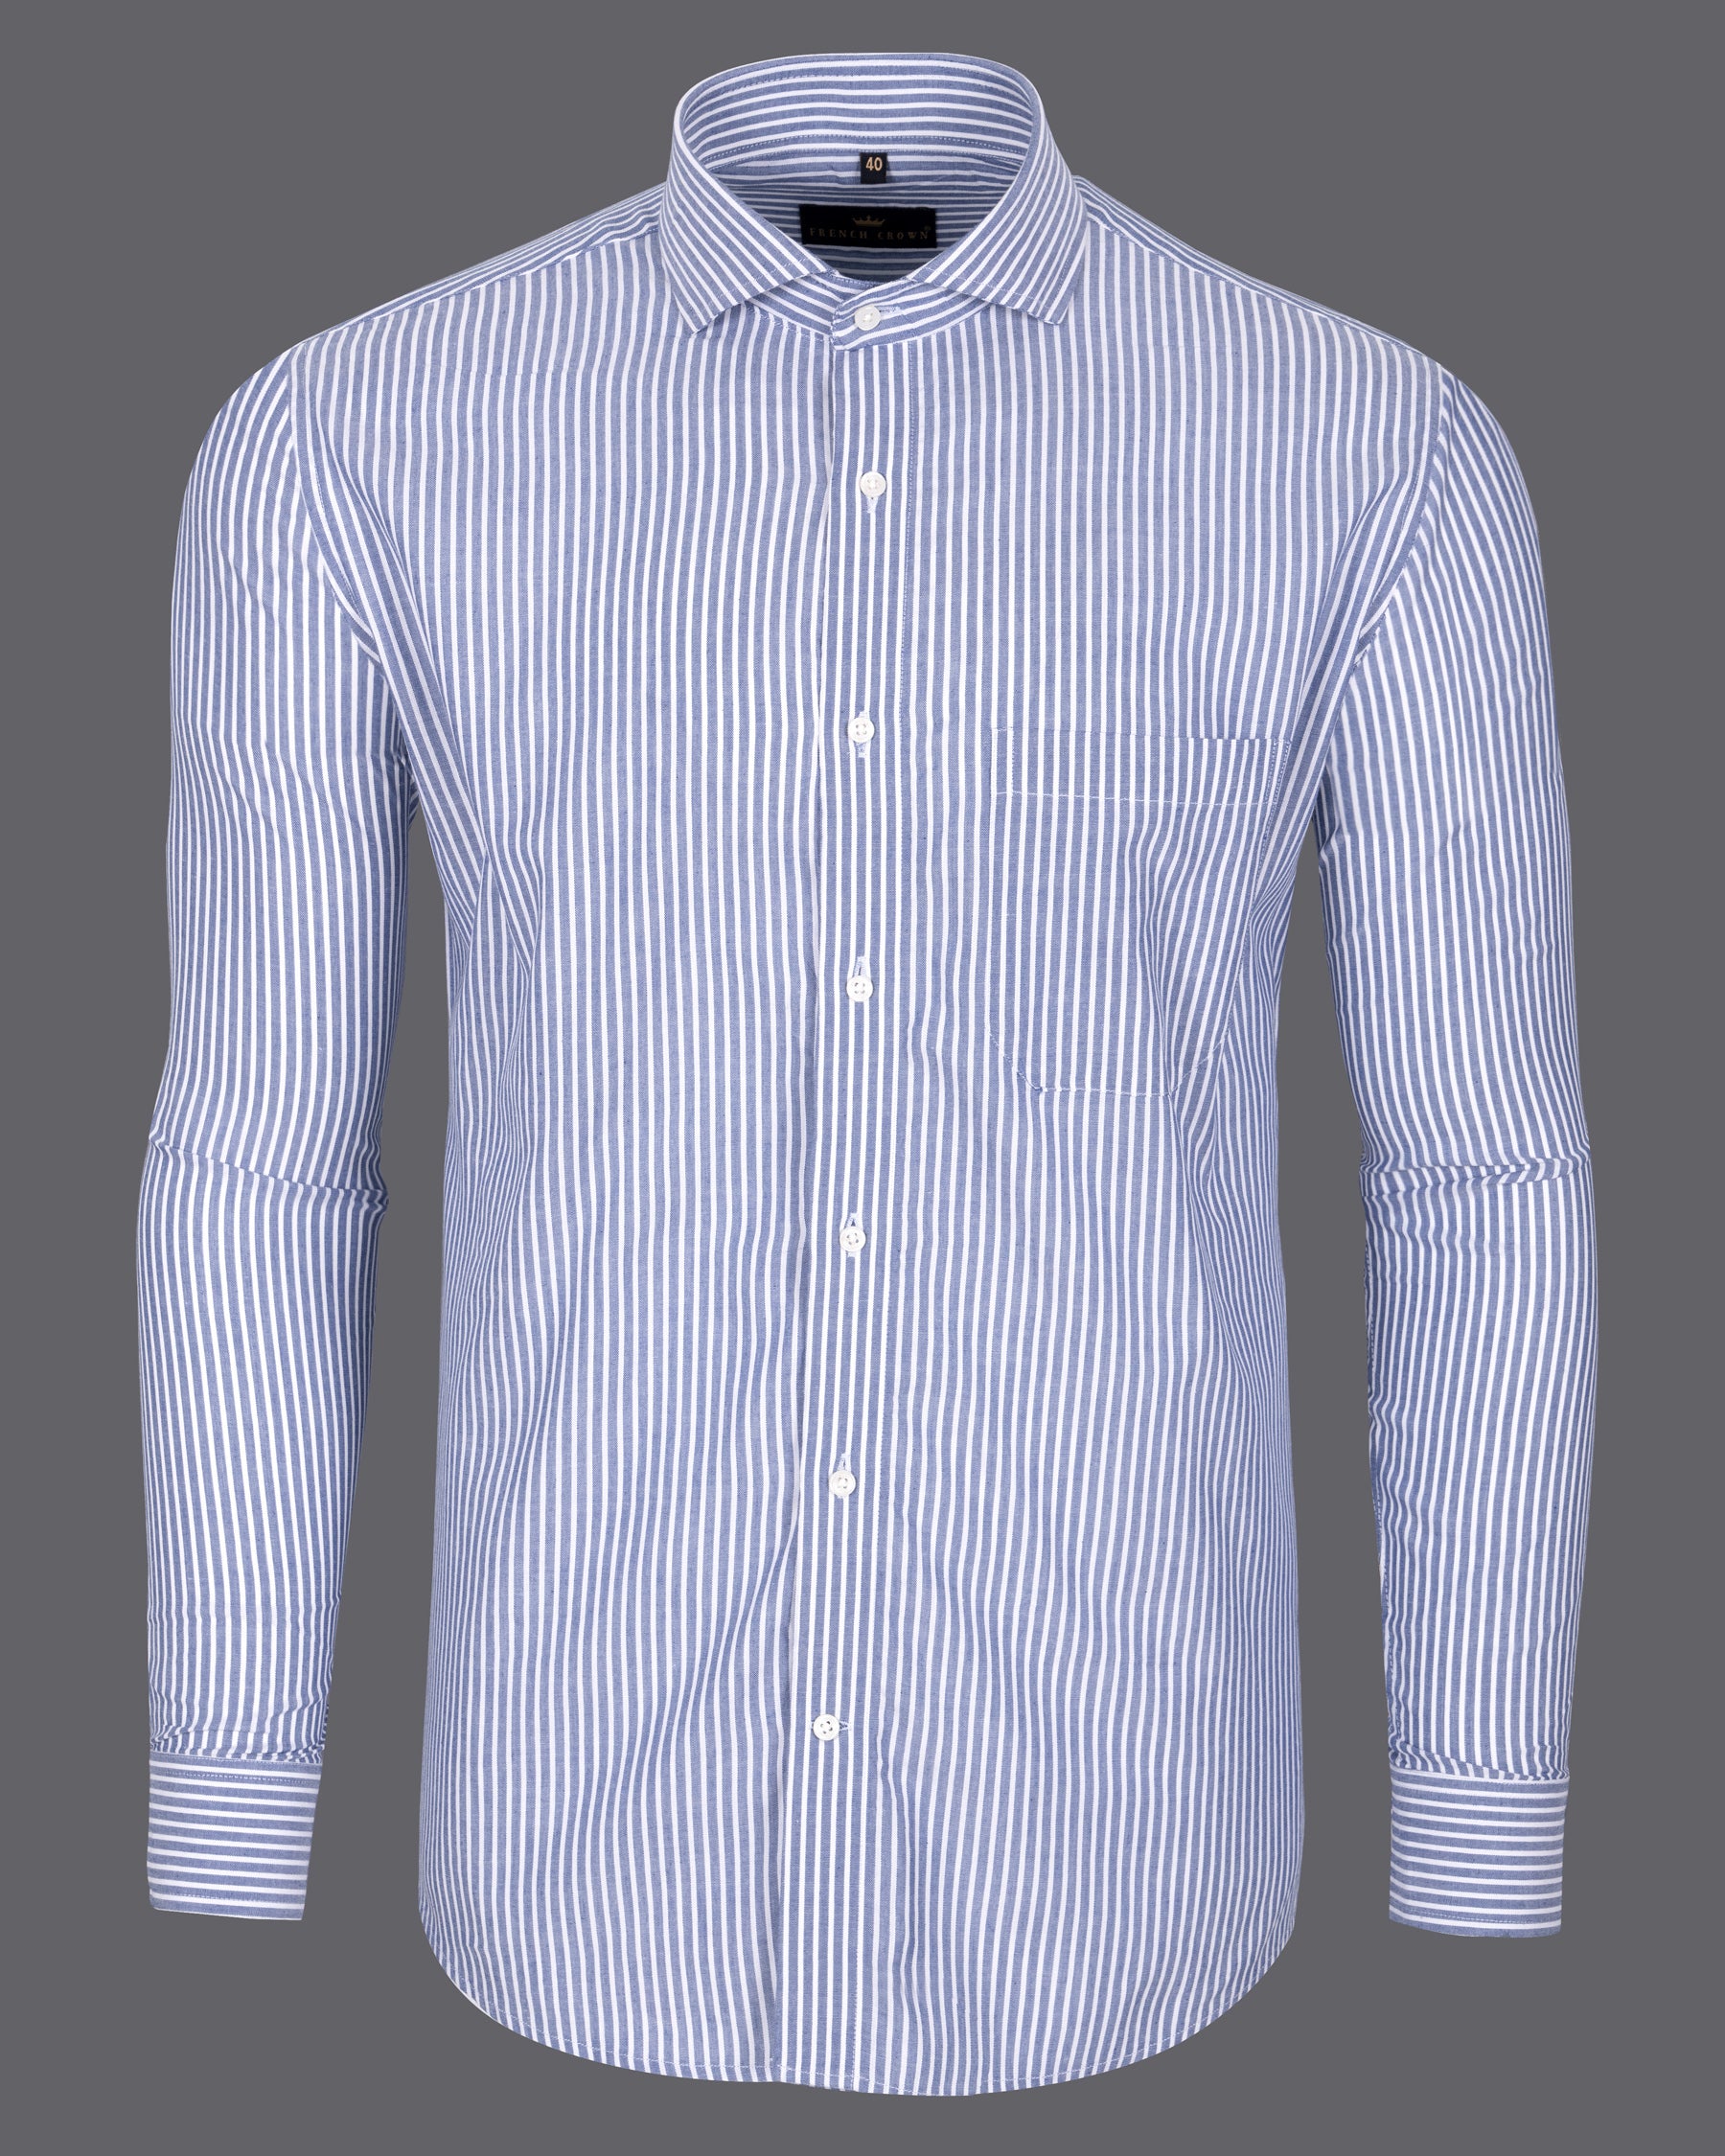 Wild Blue Yonder with White Striped Royal Oxford Shirt 5359-CA-38, 5359-CA-H-38, 5359-CA-39, 5359-CA-H-39, 5359-CA-40, 5359-CA-H-40, 5359-CA-42, 5359-CA-H-42, 5359-CA-44, 5359-CA-H-44, 5359-CA-46, 5359-CA-H-46, 5359-CA-48, 5359-CA-H-48, 5359-CA-50, 5359-CA-H-50, 5359-CA-52, 5359-CA-H-52